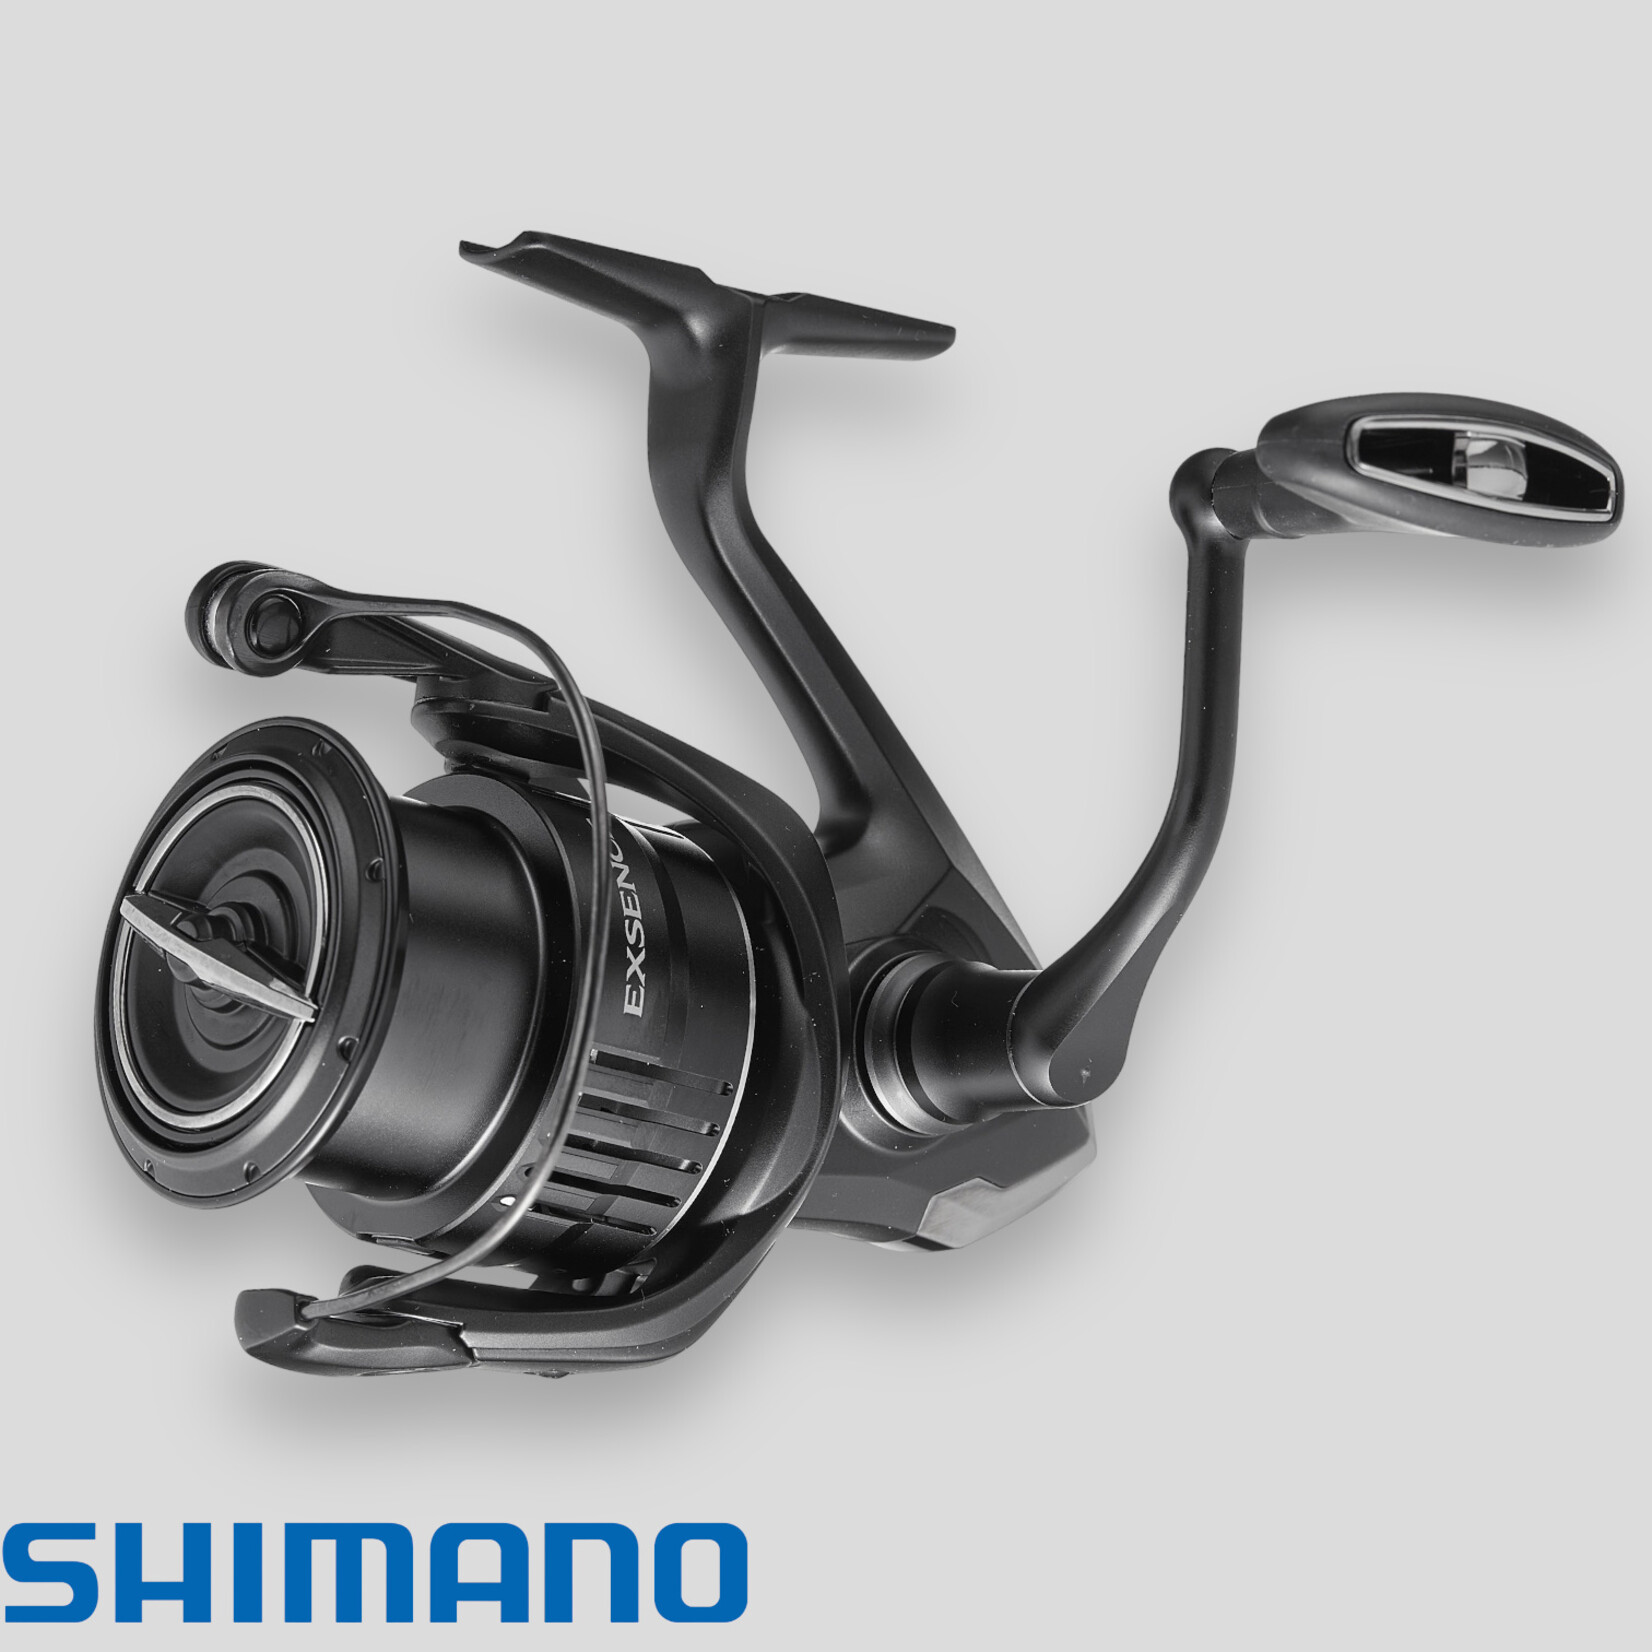 Reel Exsence A, SPINNING FRONT DRAG, SPINNING, REELS, PRODUCT